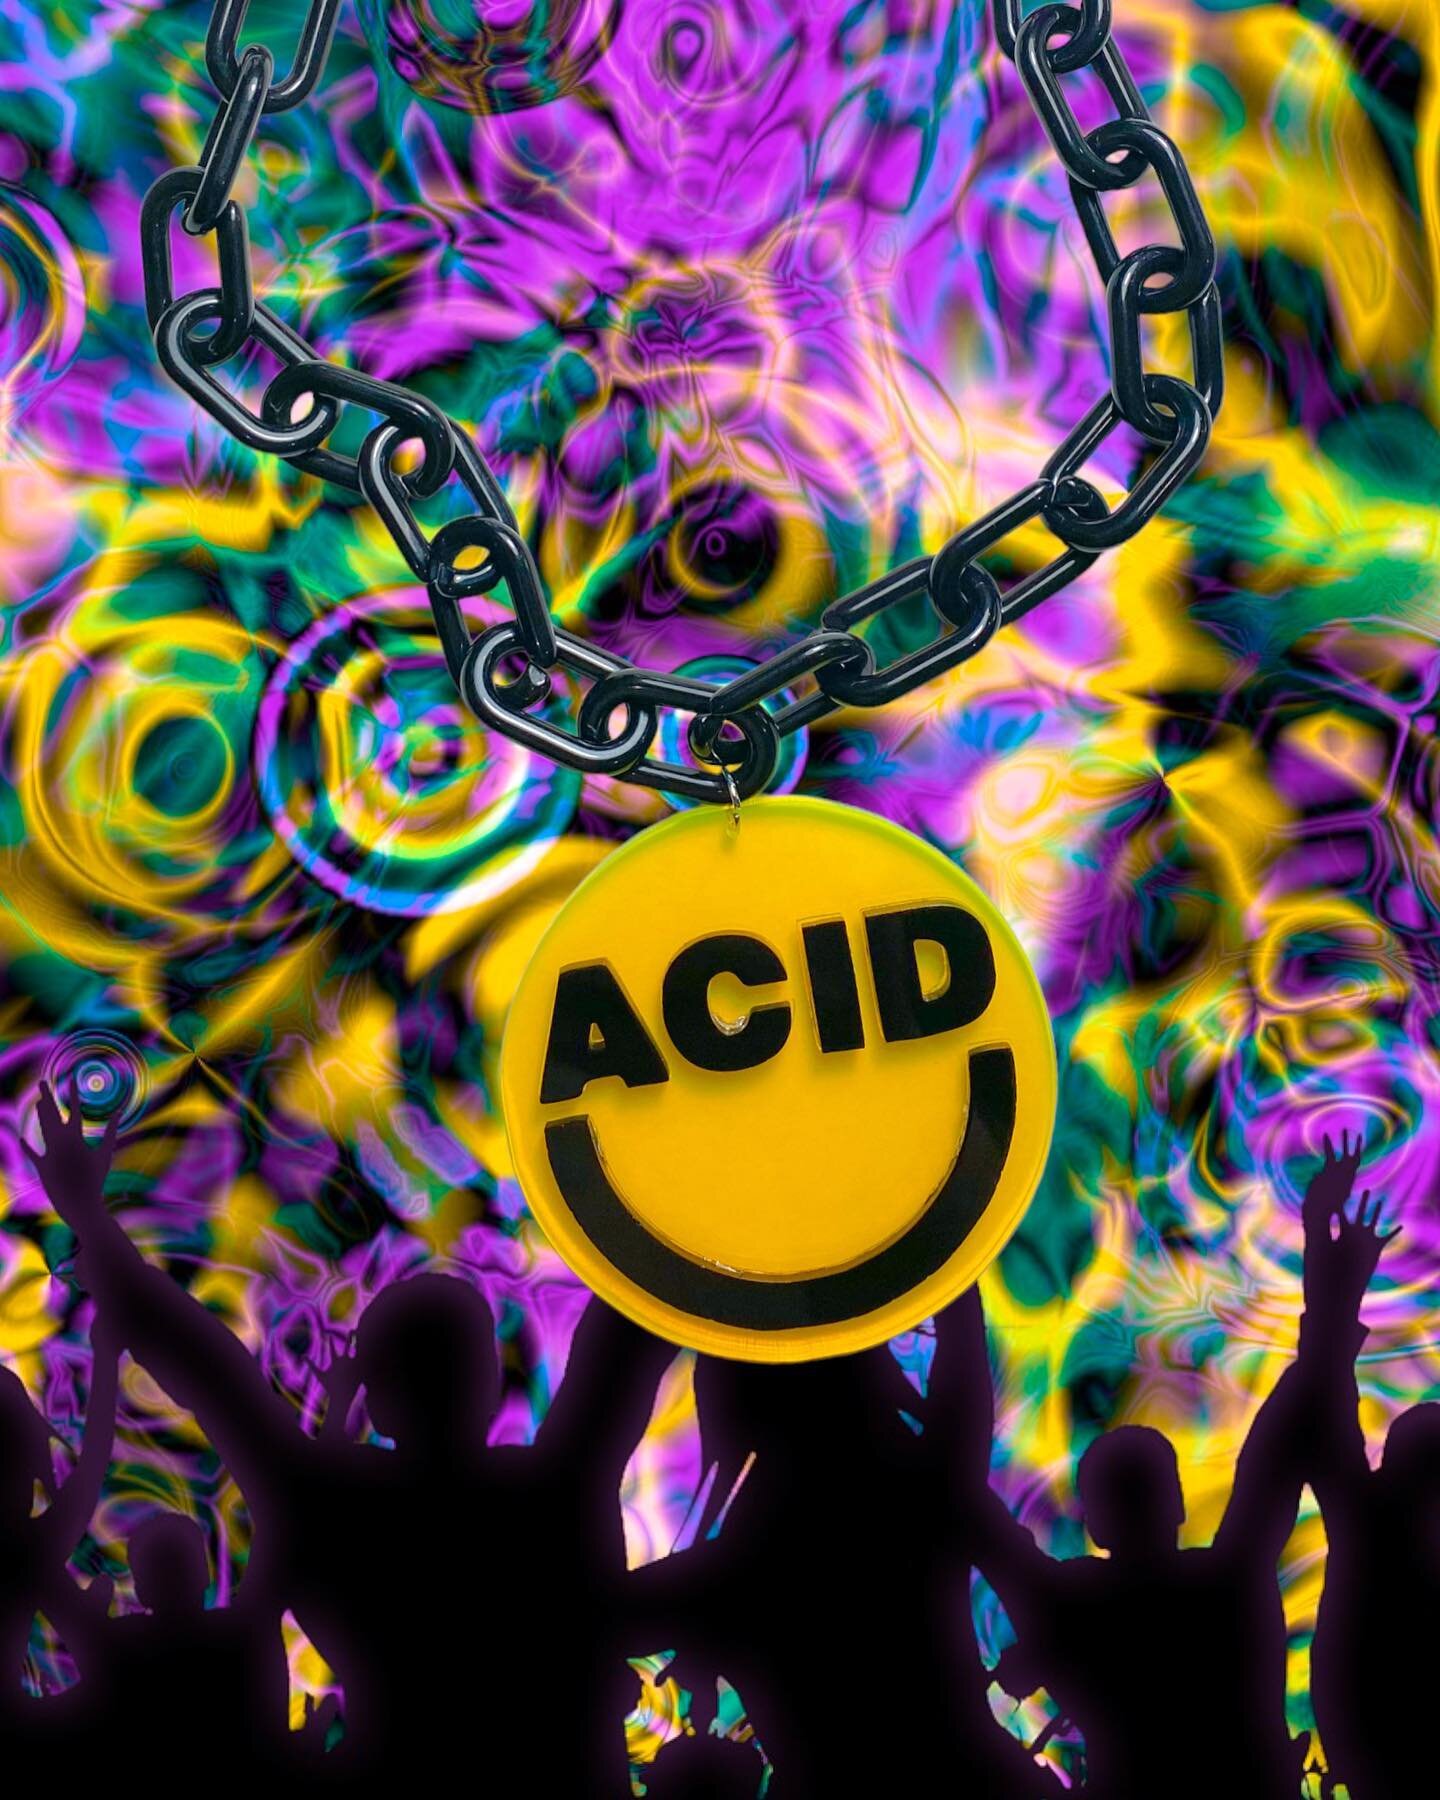 Acid Smiley 😃
The perfect accessory for your next rave fit! 🤟🏻